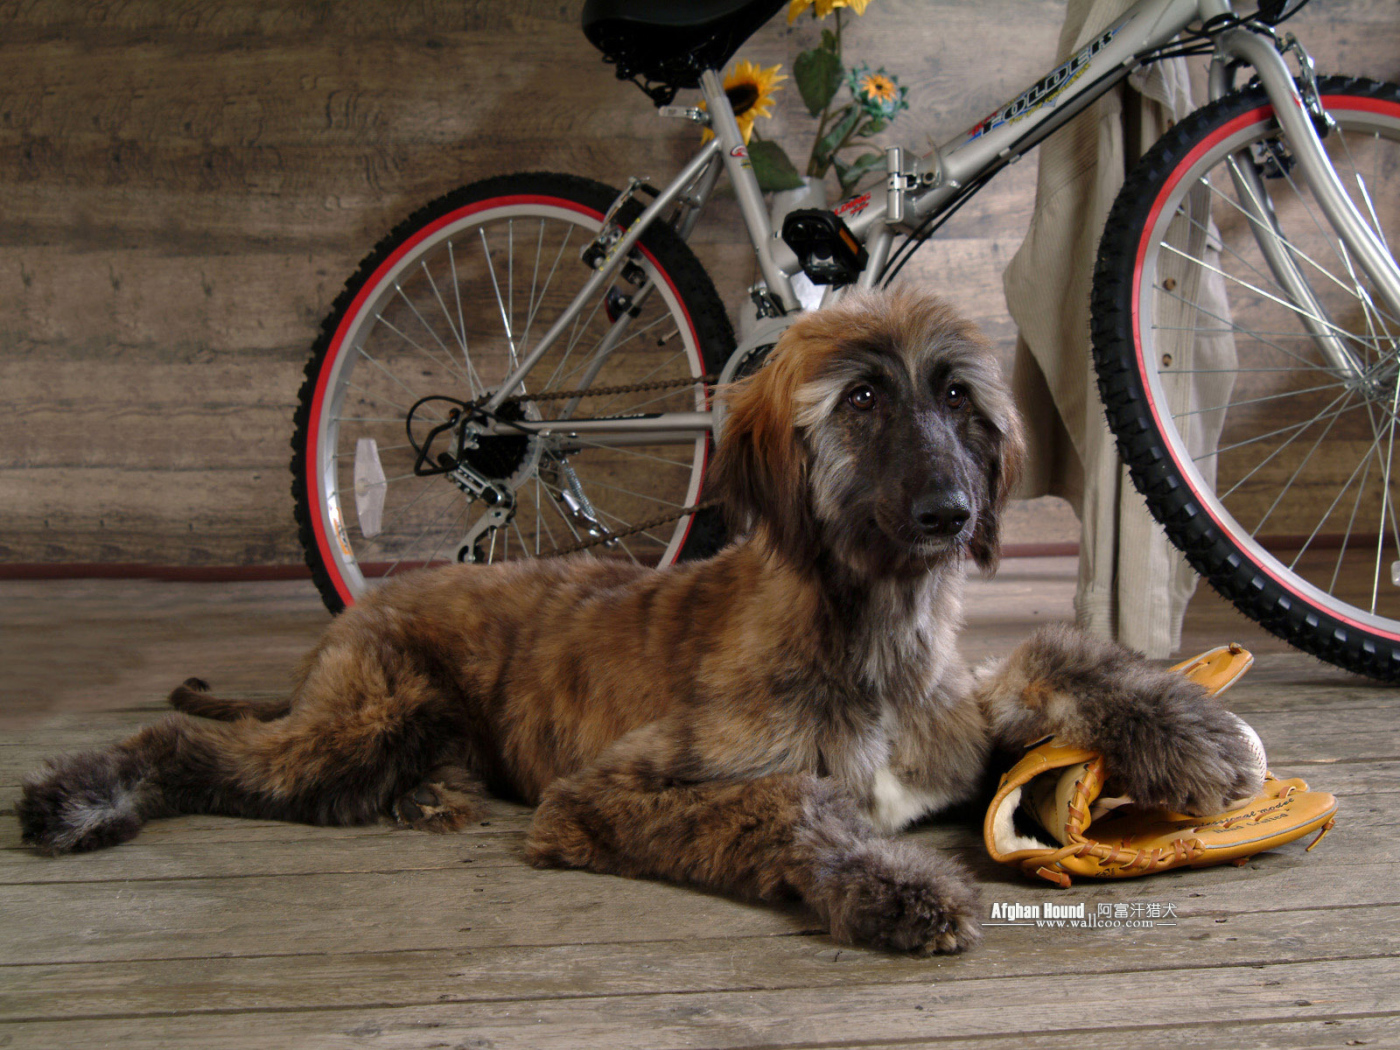 Afghan Hound on the background of the bicycle